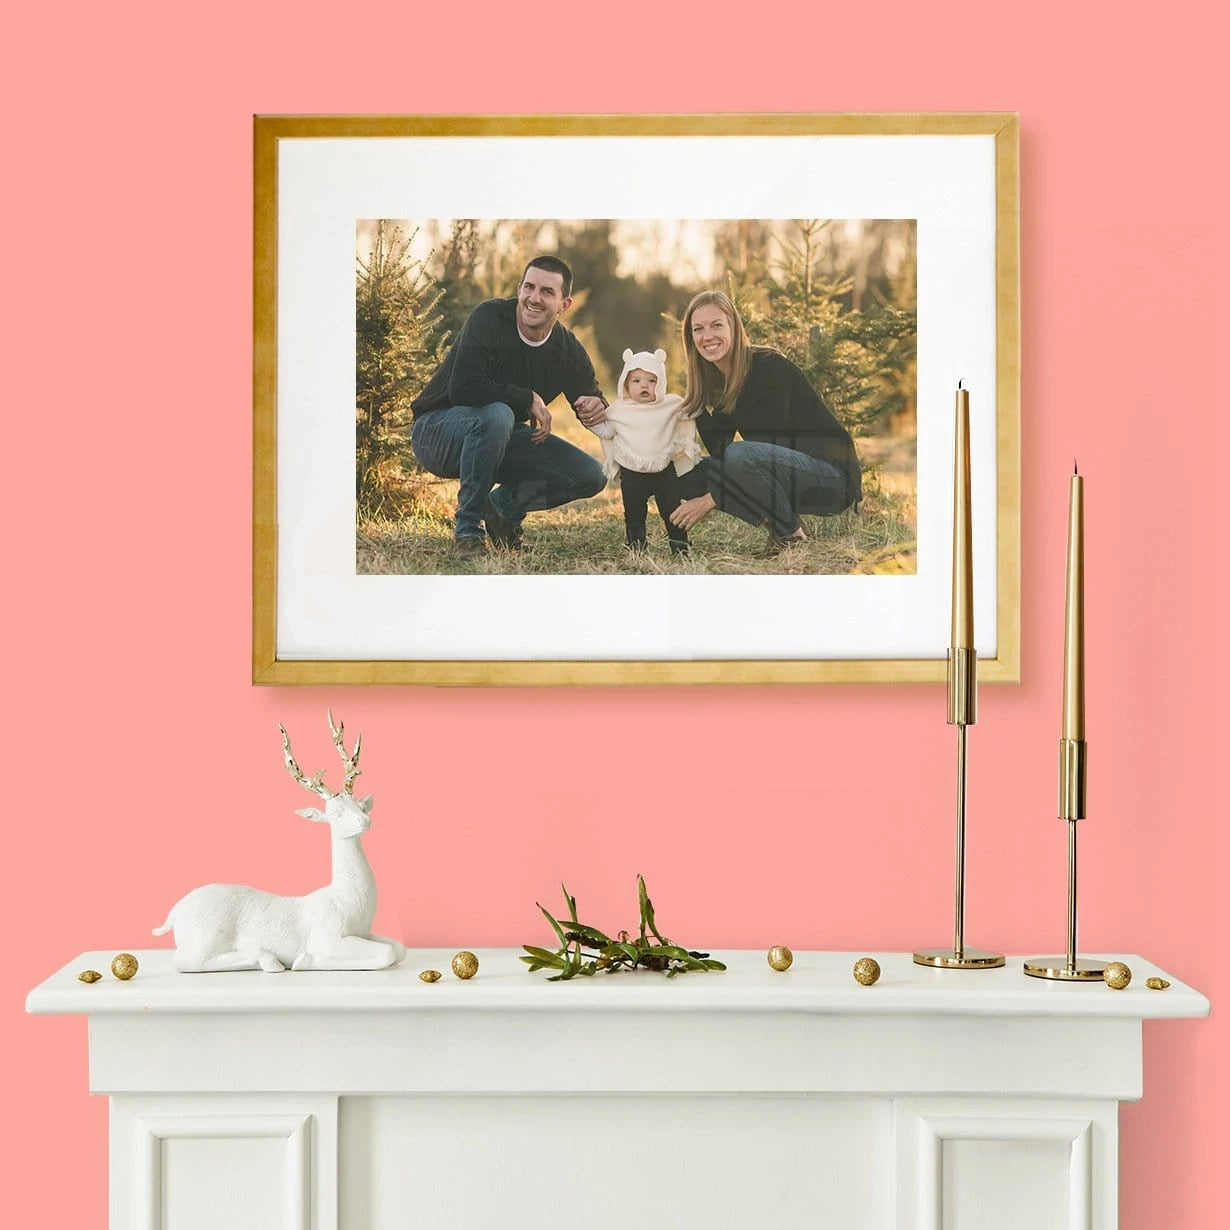 Gold Metallic Framed Print of Family Portrait Displayed Above Fireplace Mantel